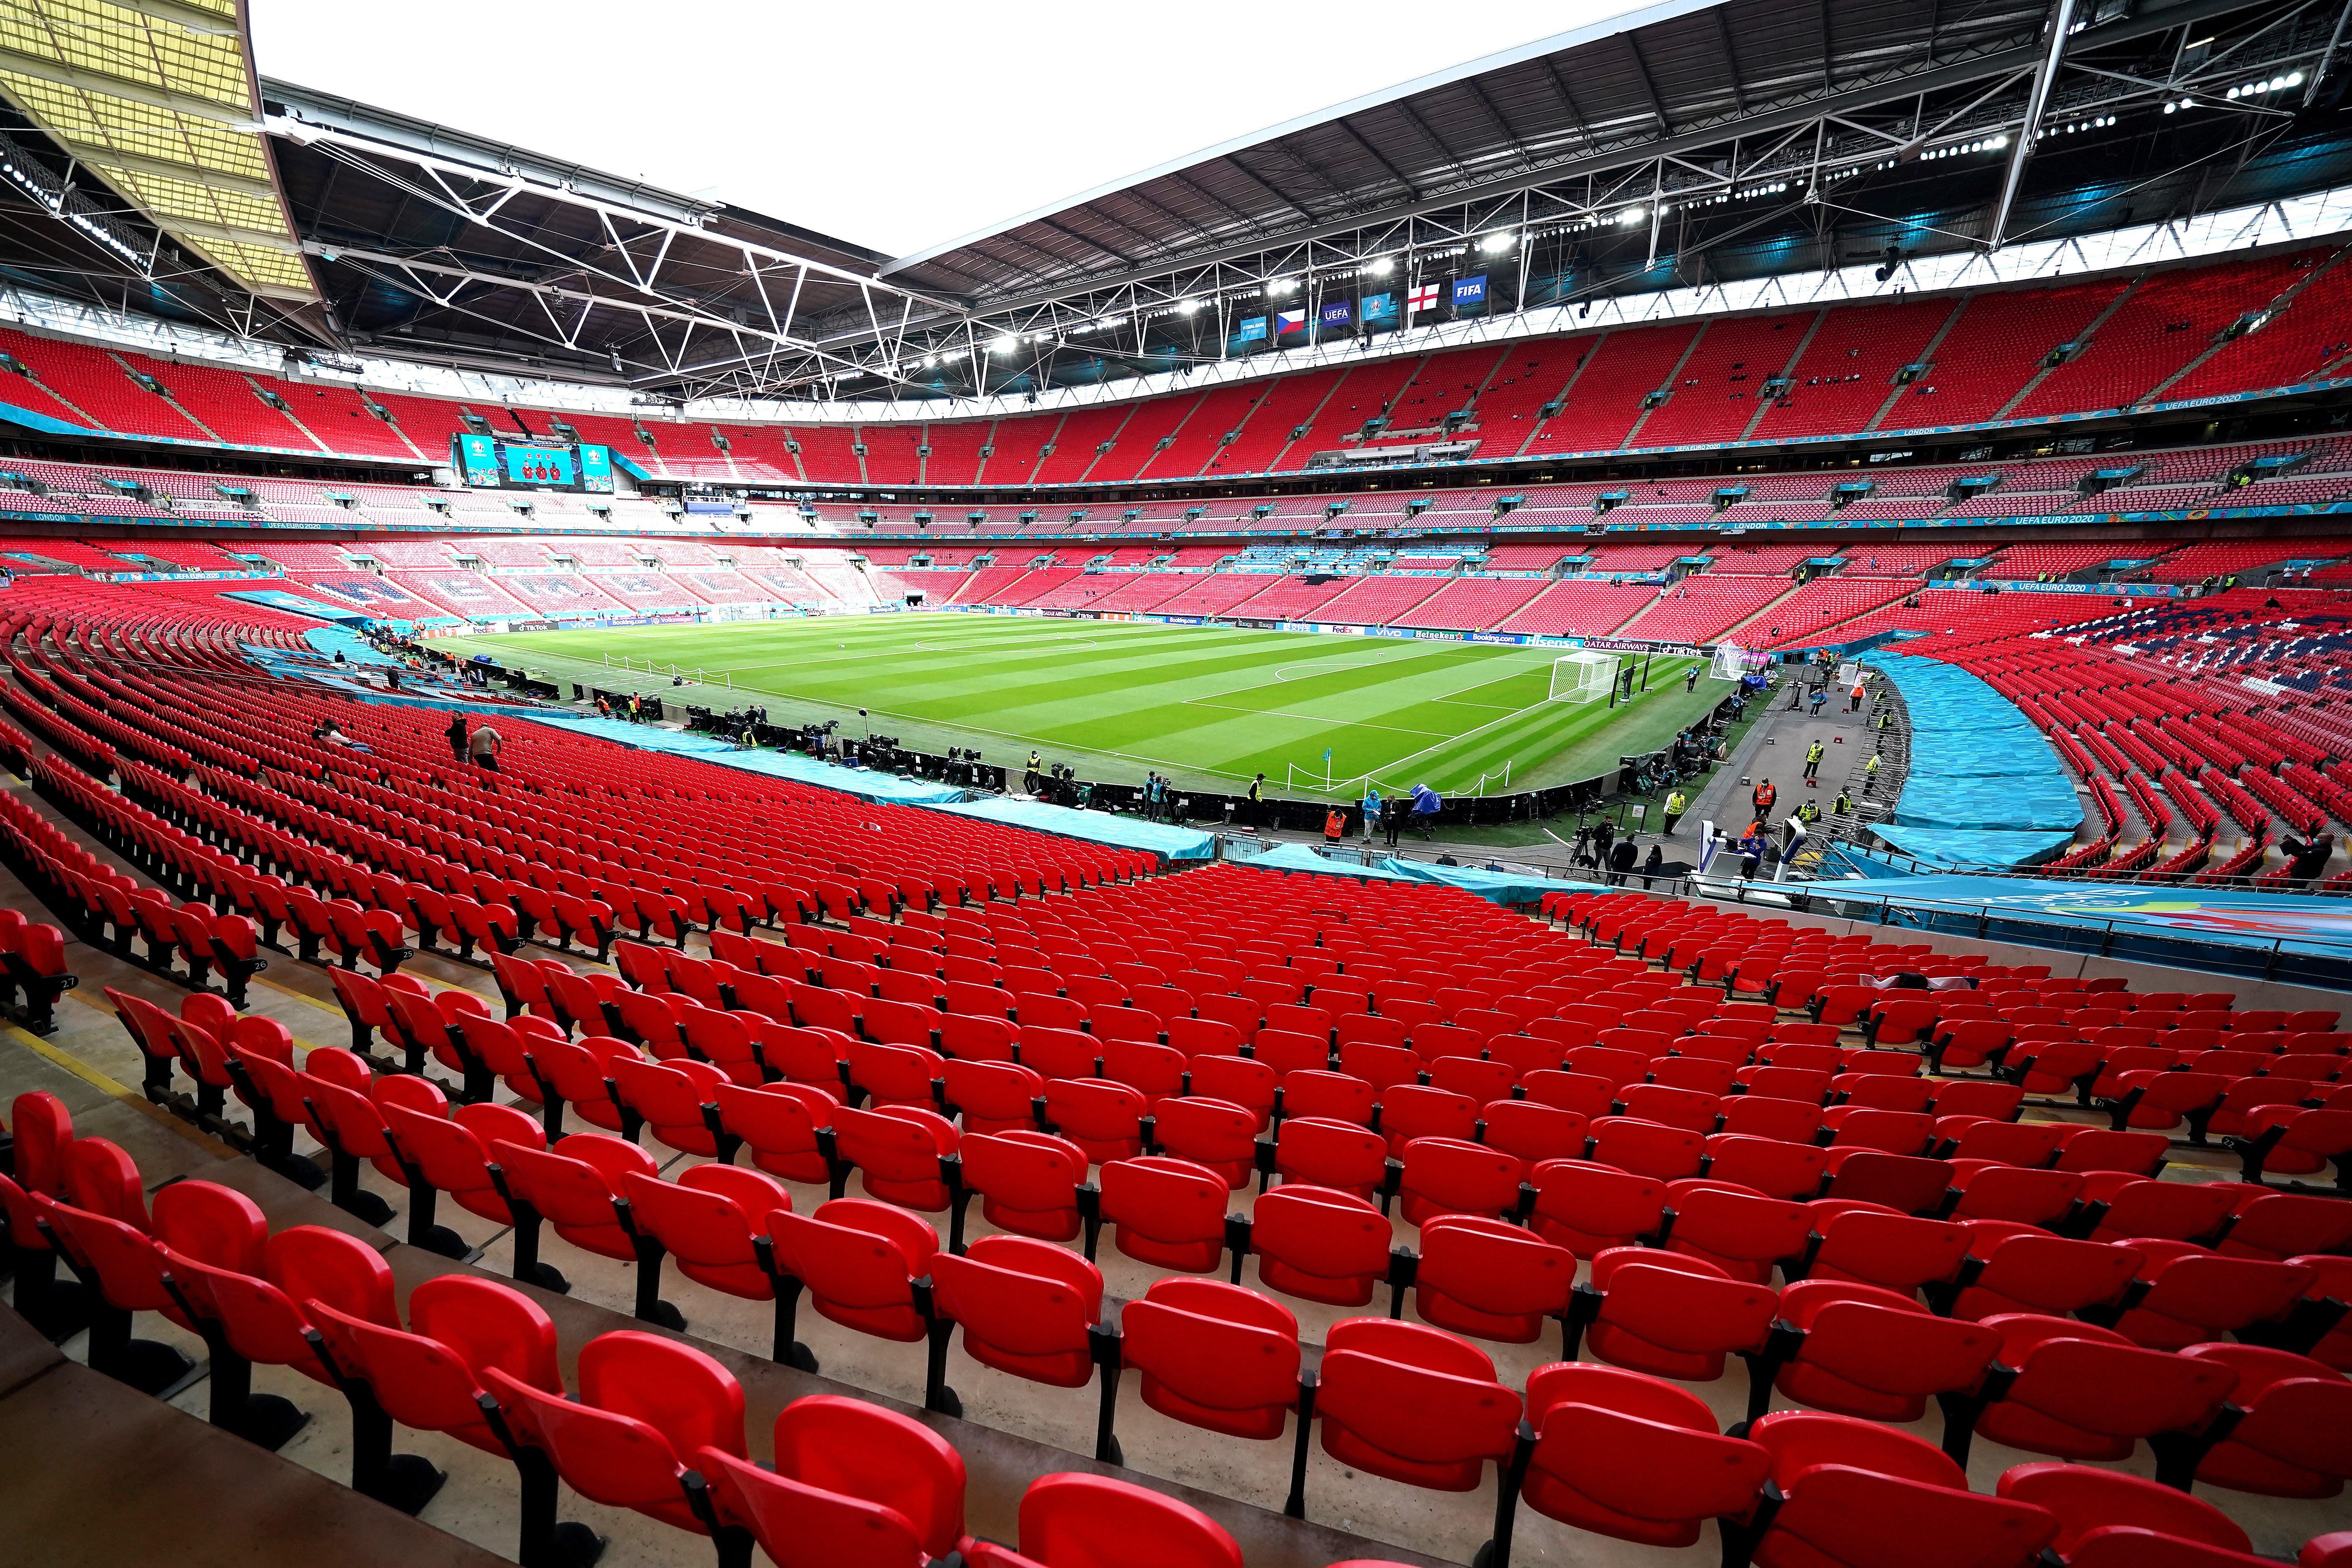 The UK and Ireland have bid to host Euro 2028 with Wembley, pictured, the obvious choice to host the final if the bid succeeds (Mike Egerton/PA)